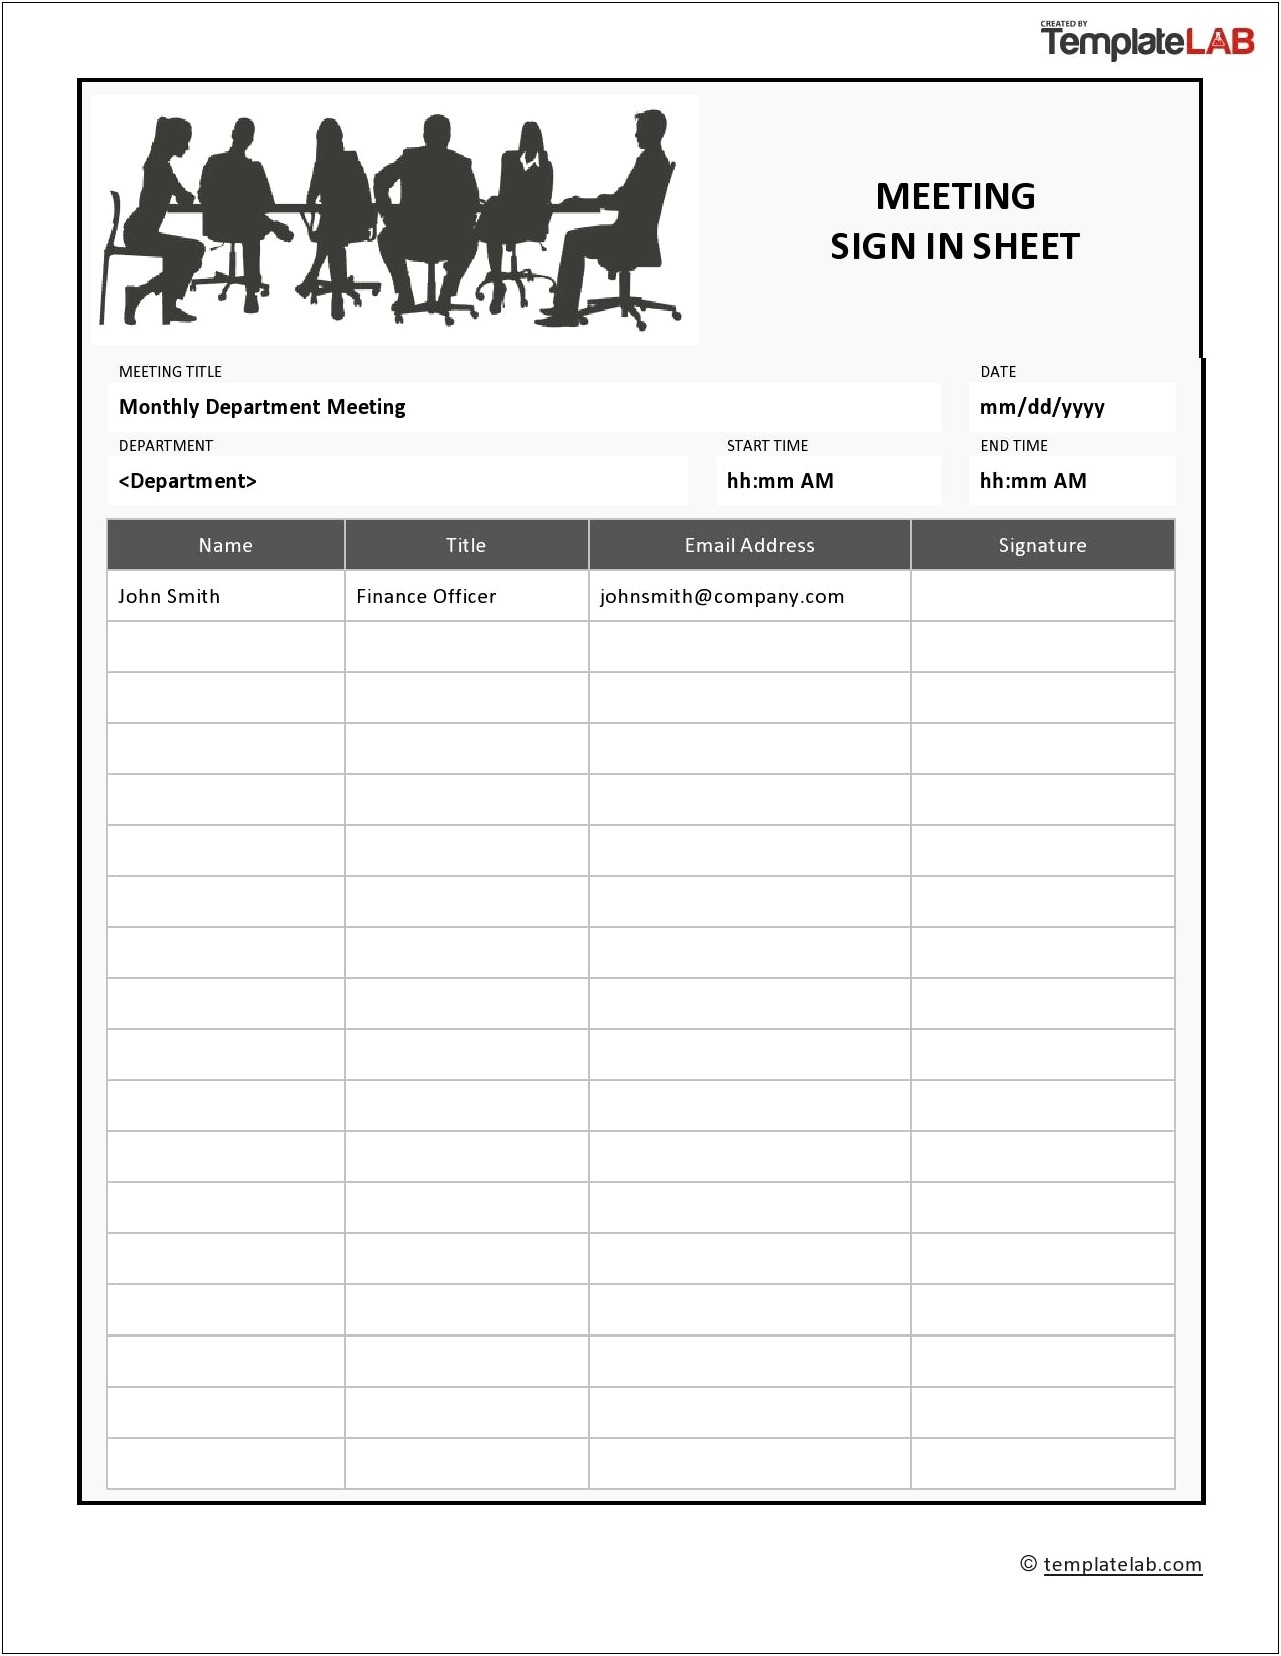 Microsoft Word Template For Sign Up Sheet